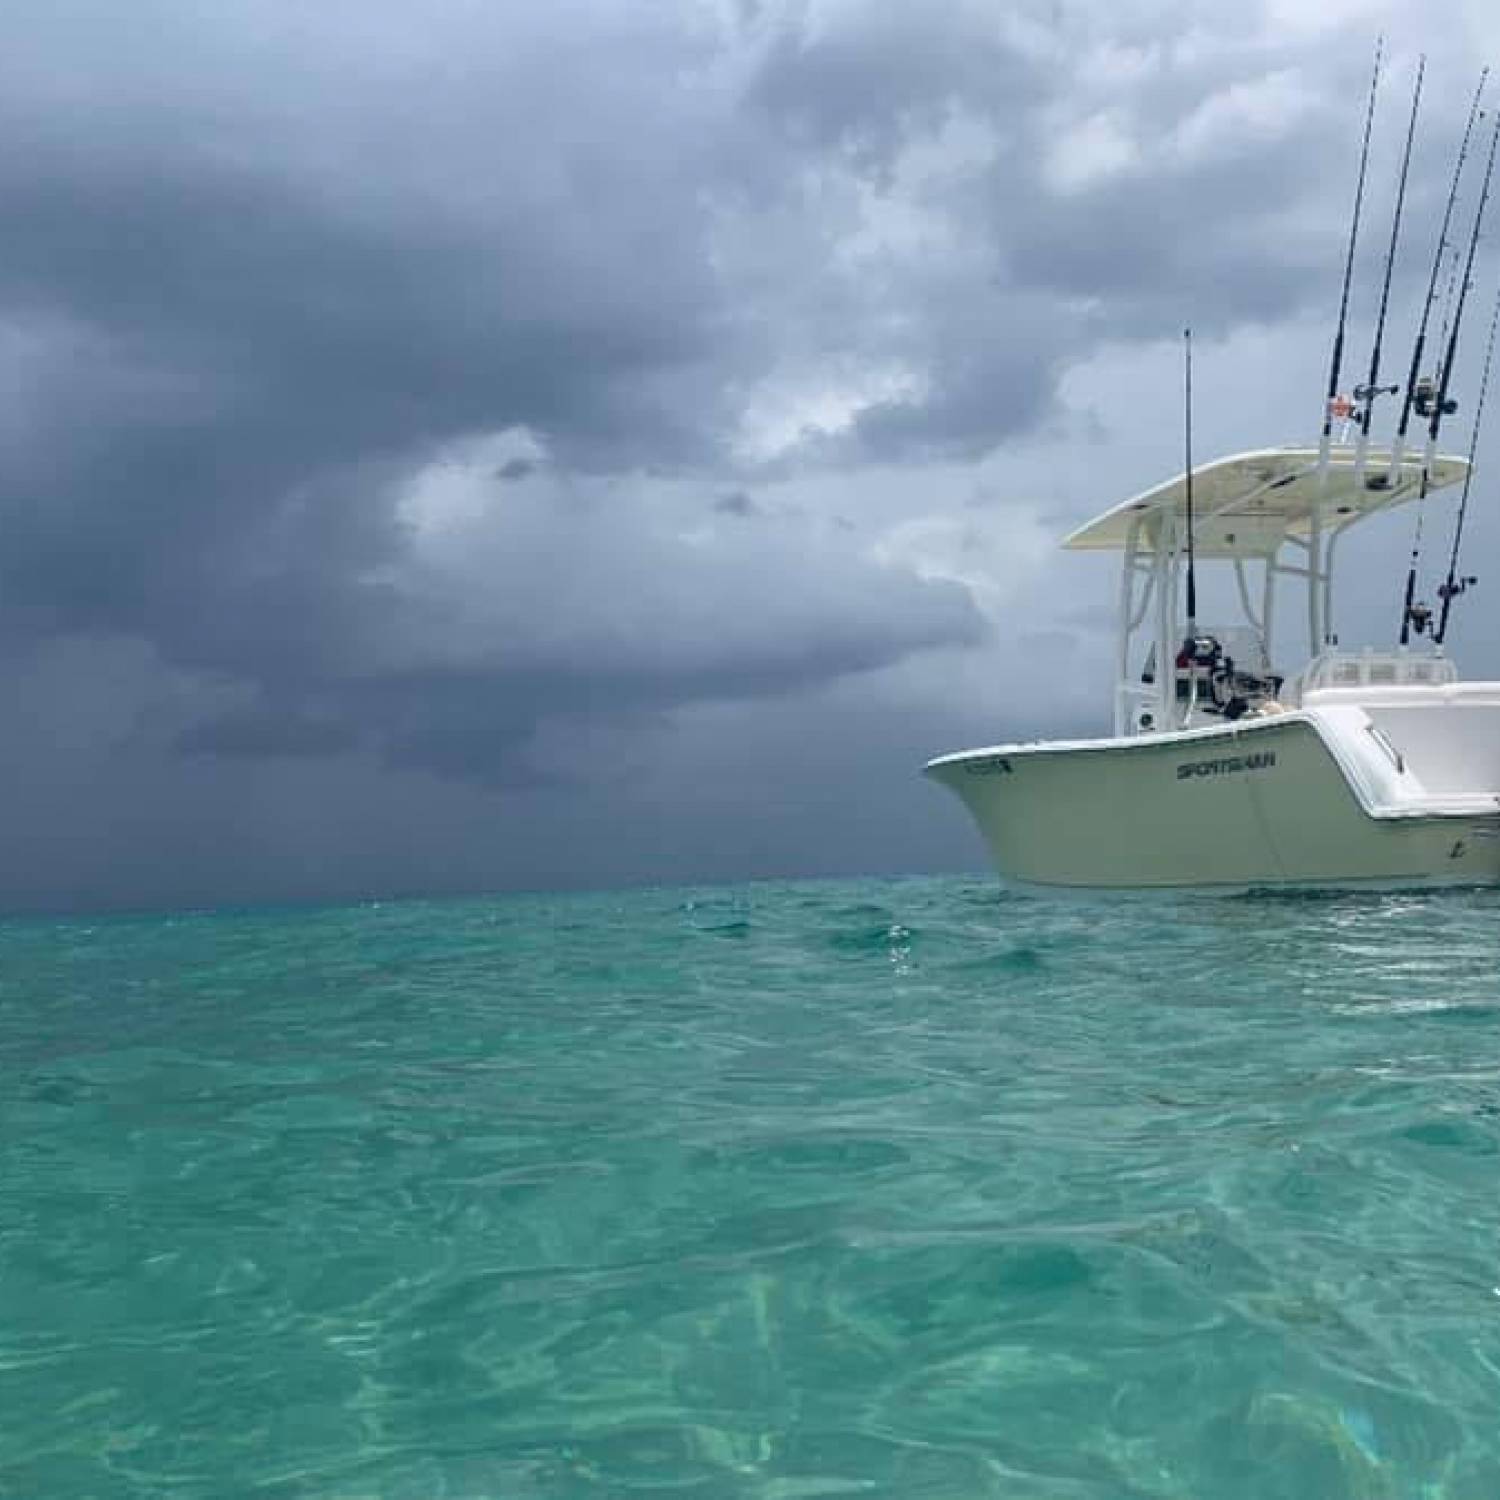 The ocean was so flat we were able to anchor at the beach dodging the summer storms in boynton...